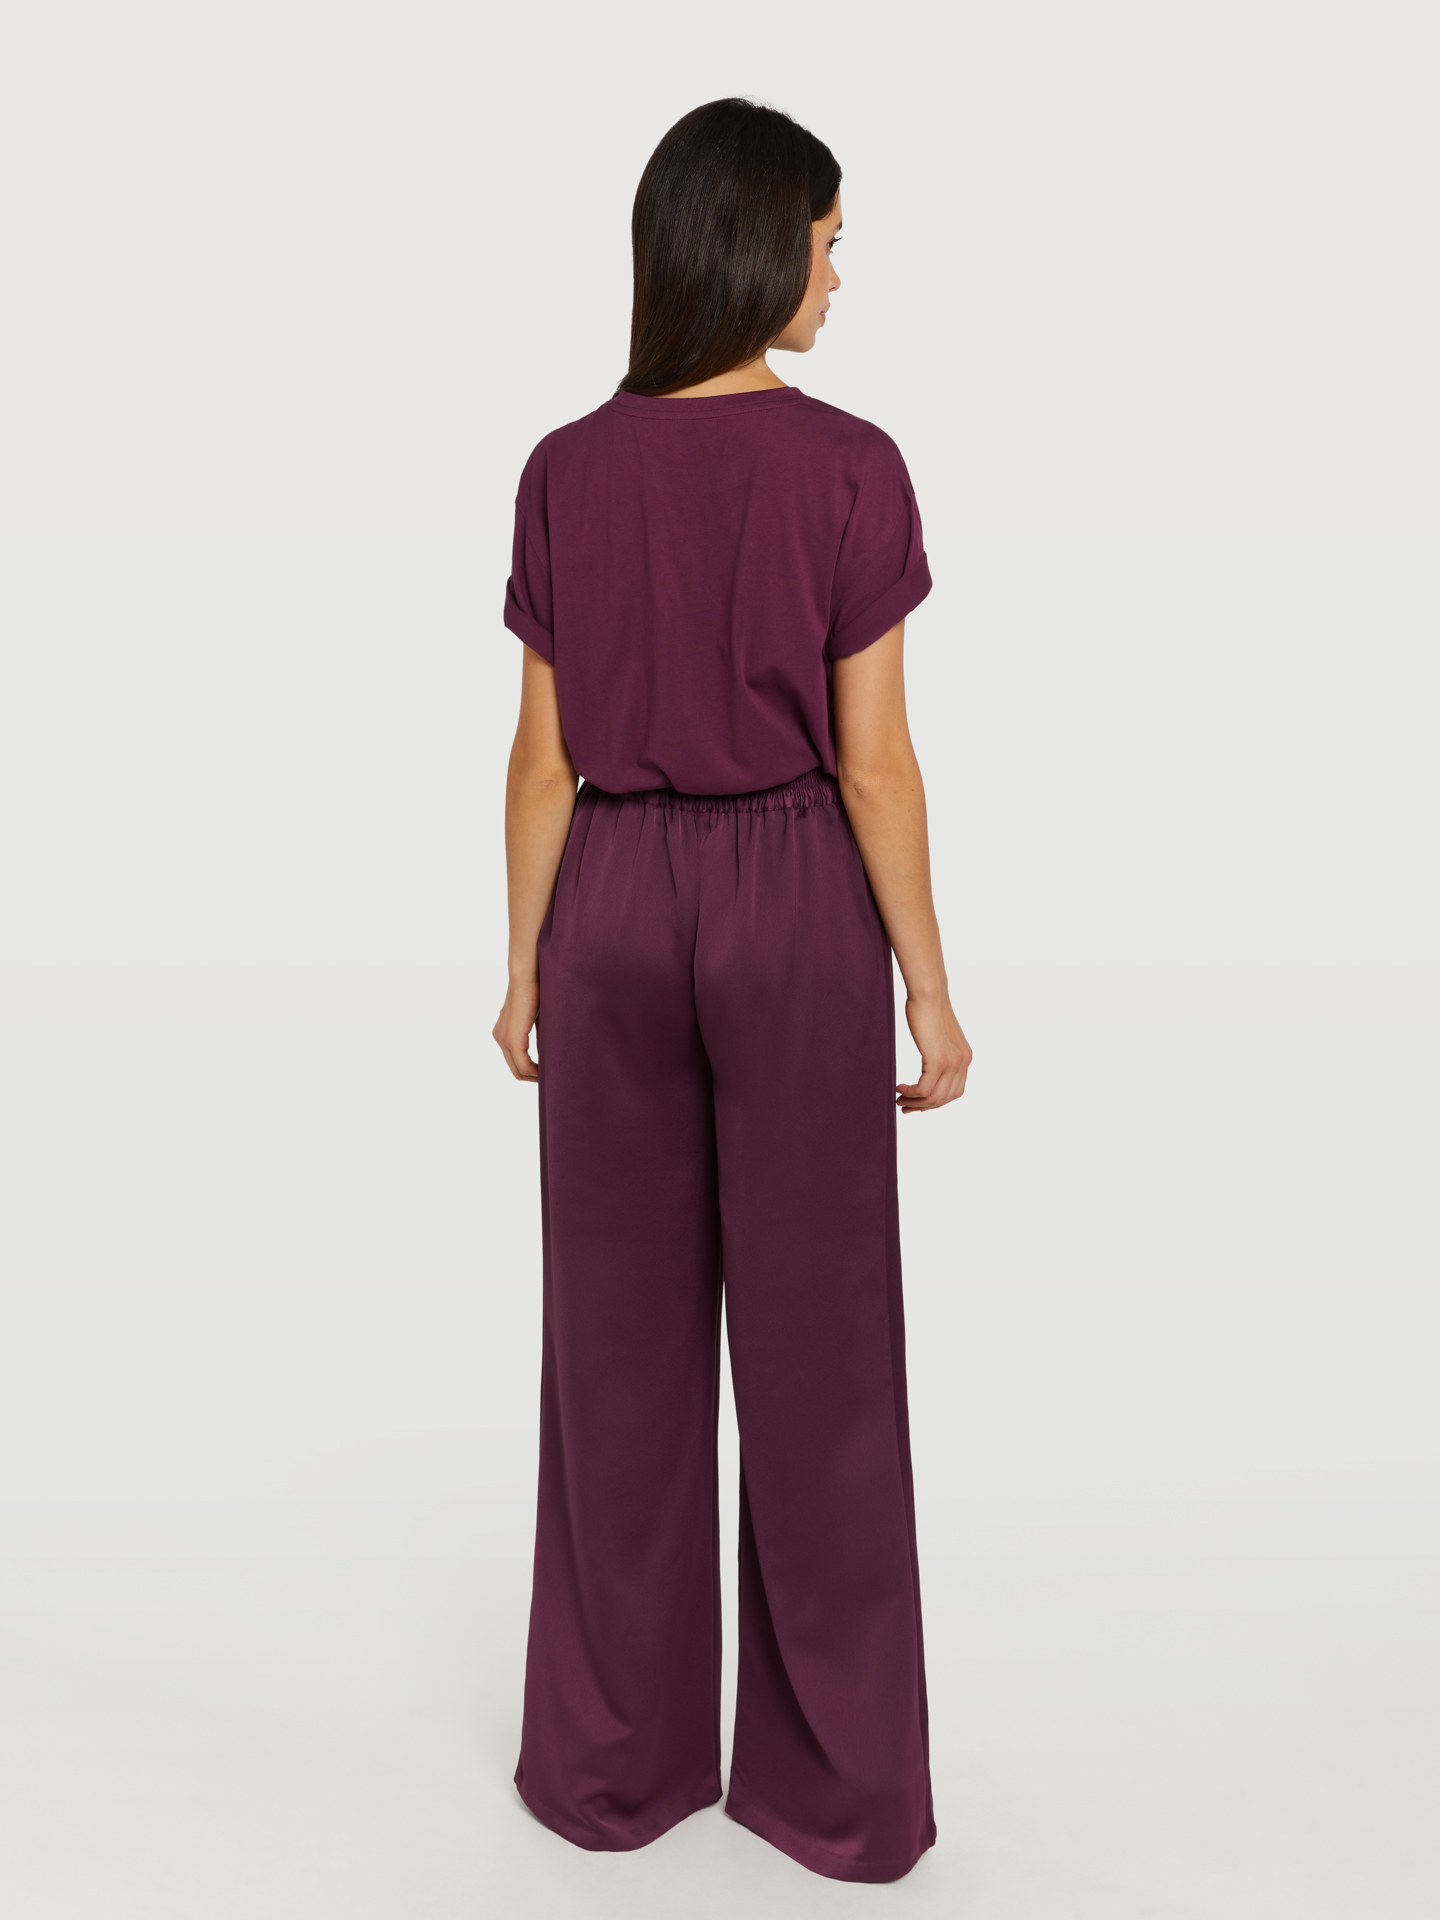 Trousers Plum Casual Woman